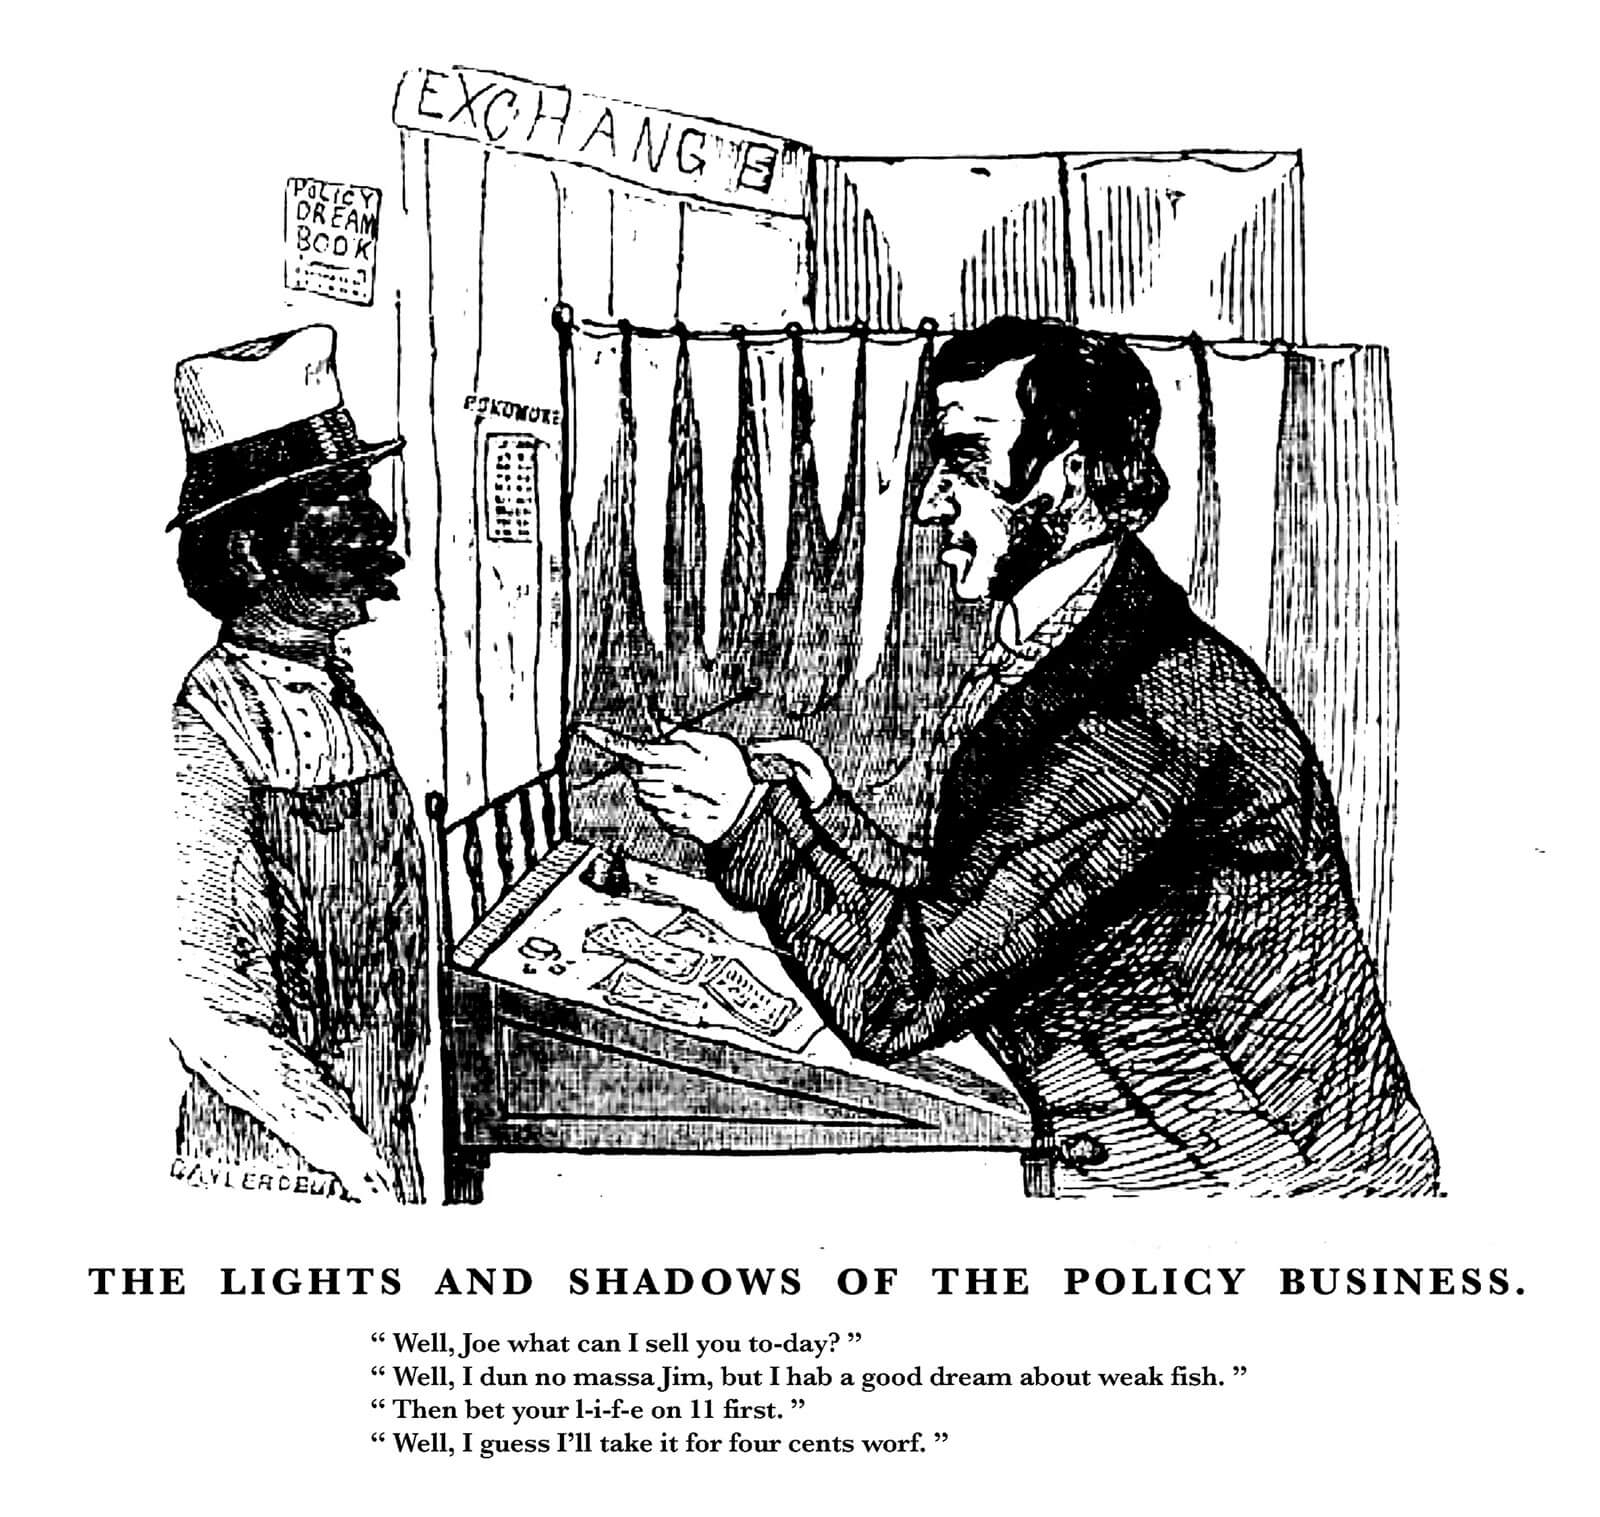 A page from the National Police Gazette, 1 July eighteen forty-eight, showing a racist caricature entitled “The Lights and Shadows of the Policy Business.” 